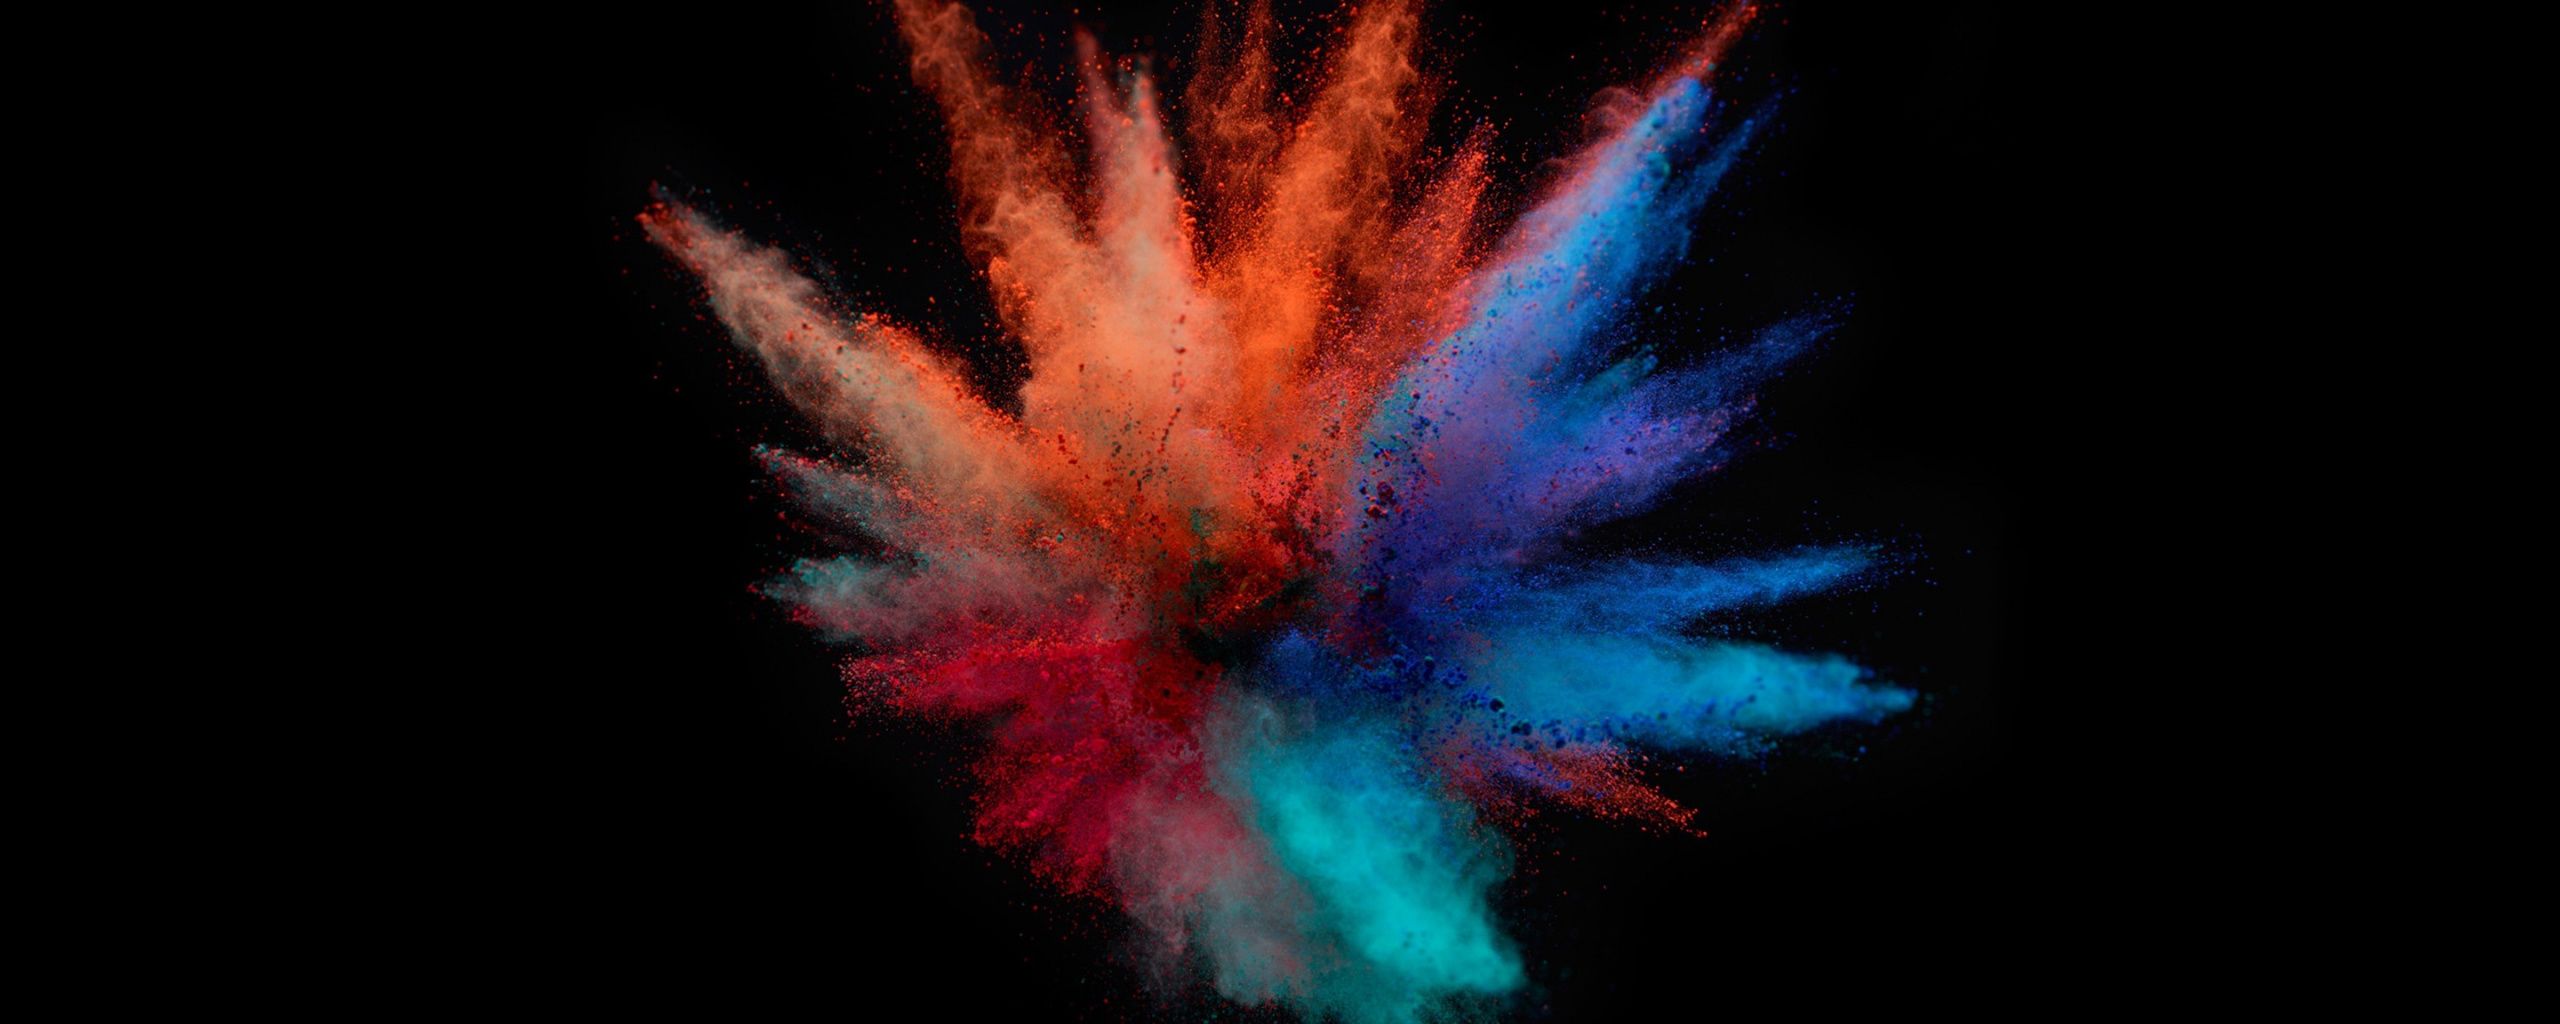 Download Color powder, explosion, colorful wallpaper, 2560x Dual Wide, Wide 21: Widescreen